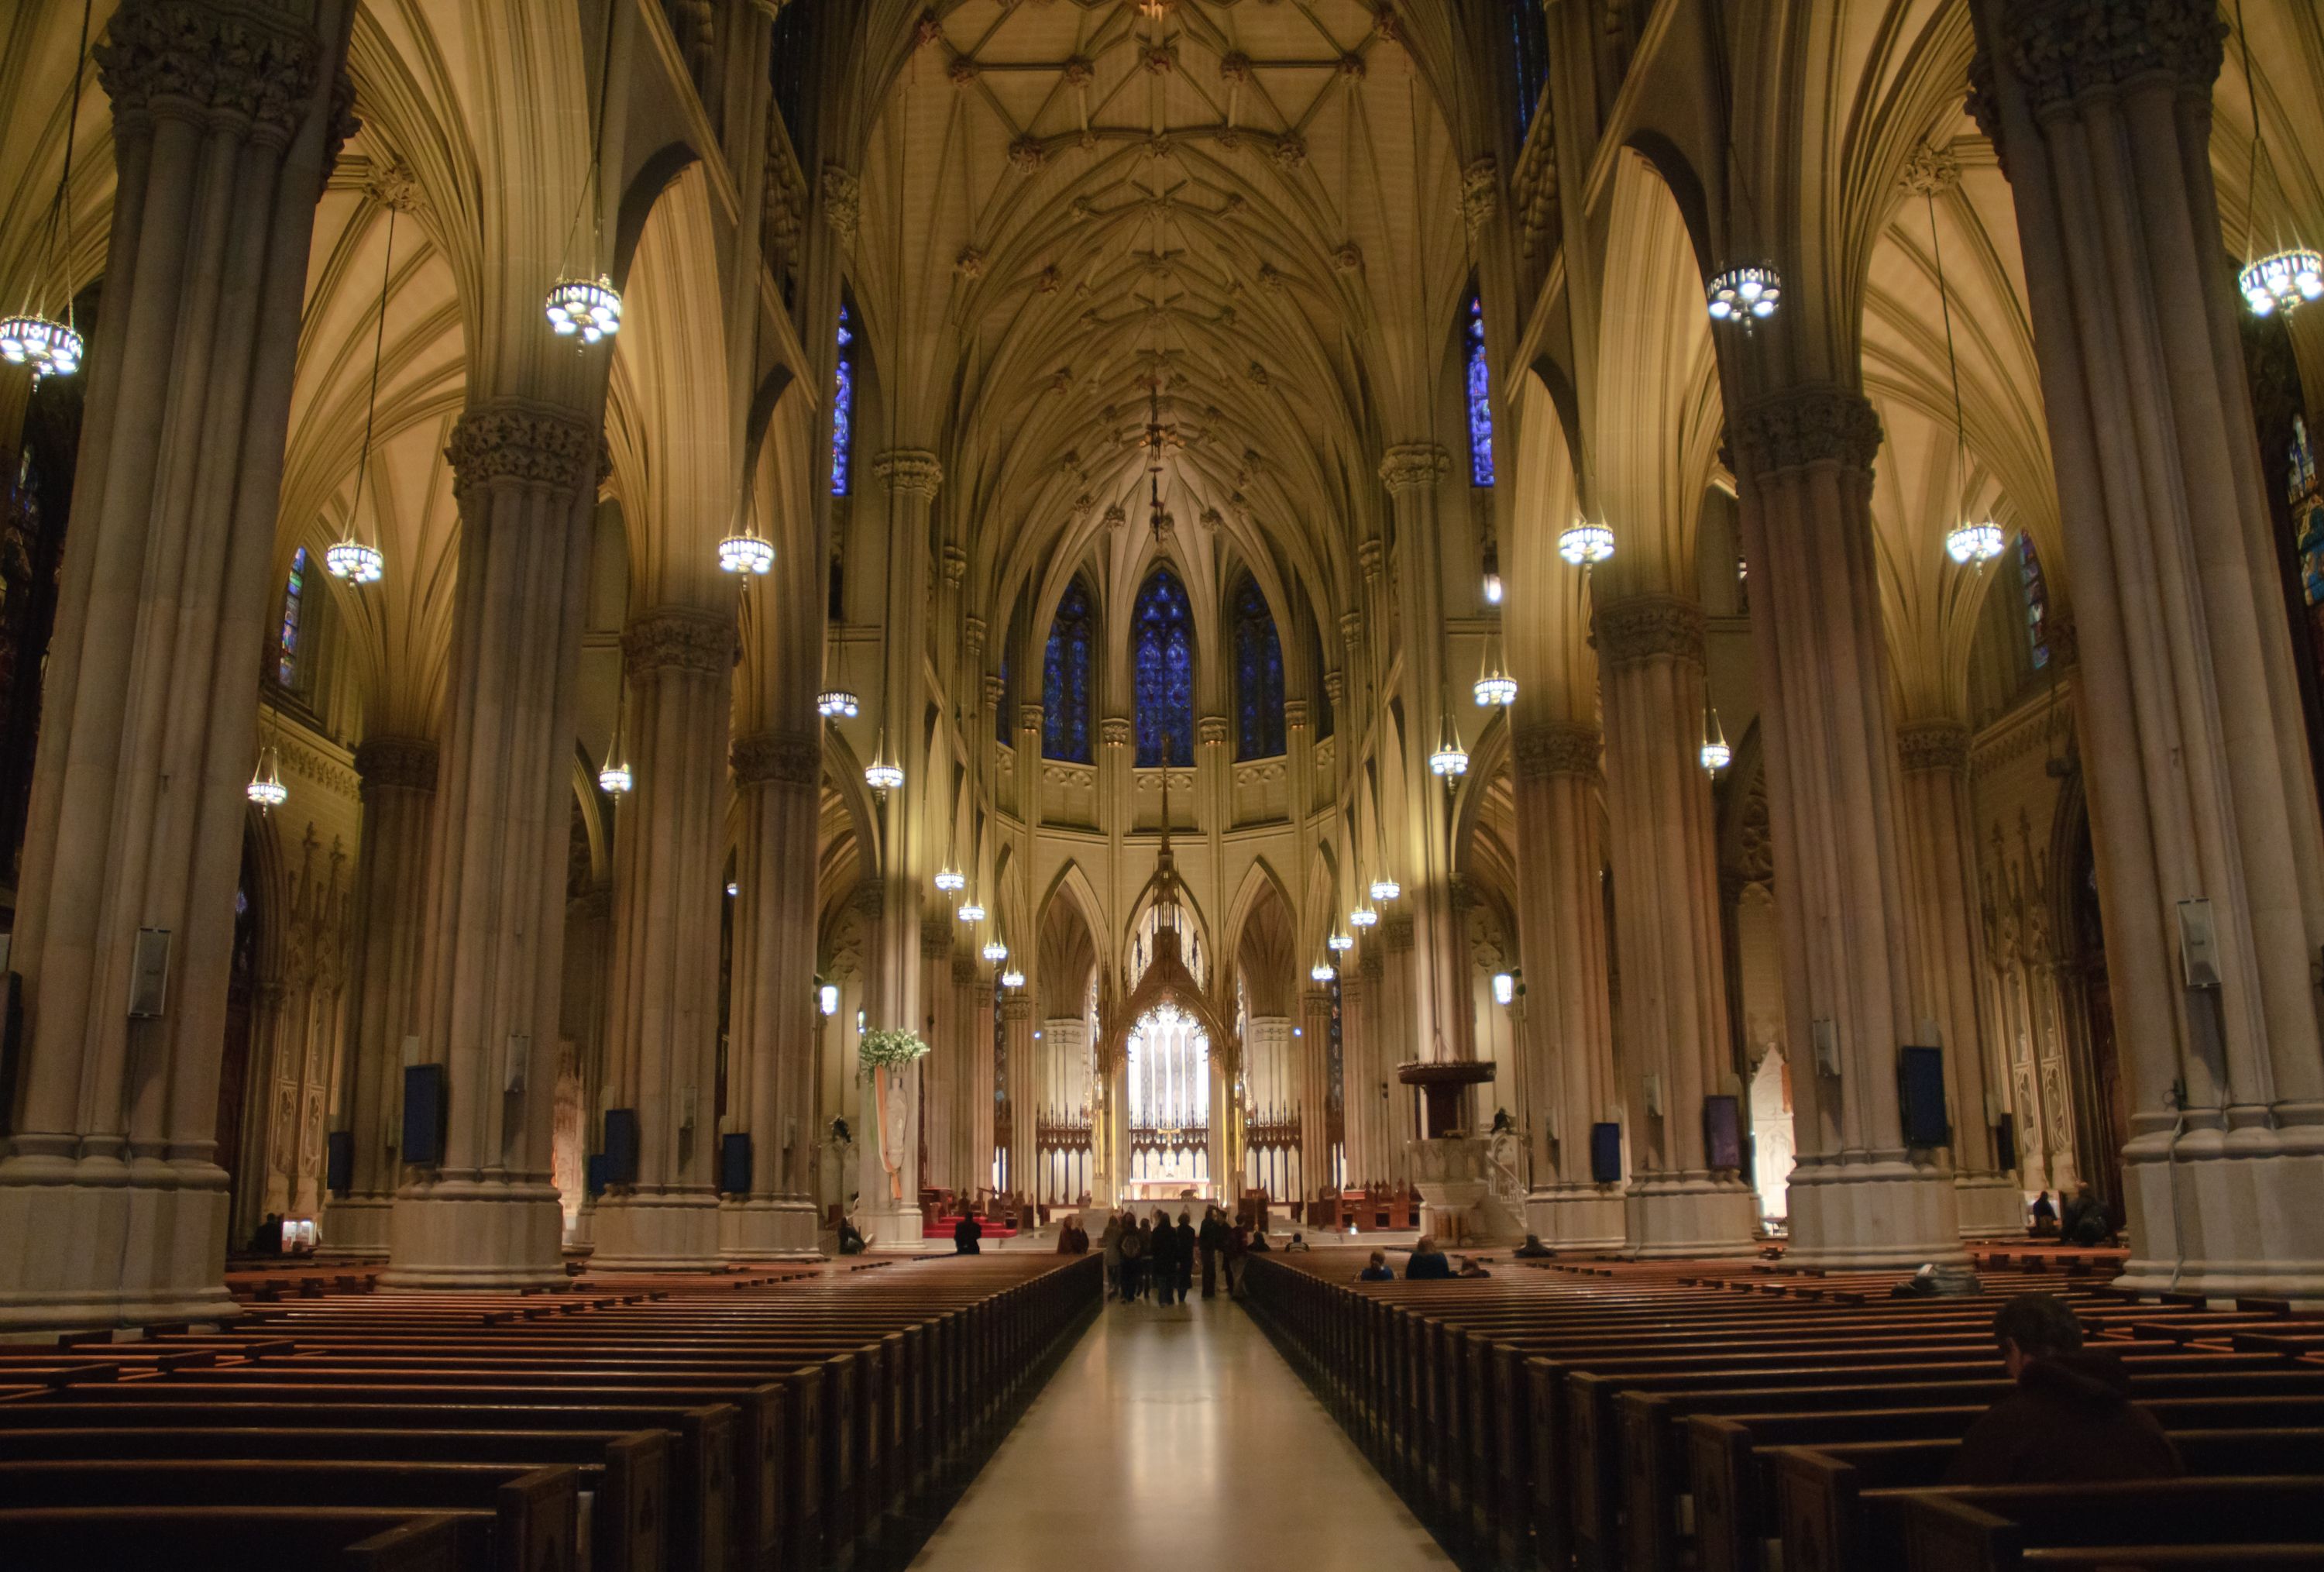 St. Patrick's Cathedral interior in New York City. Image by Zack Frank / Shutterstock. United States, undated.